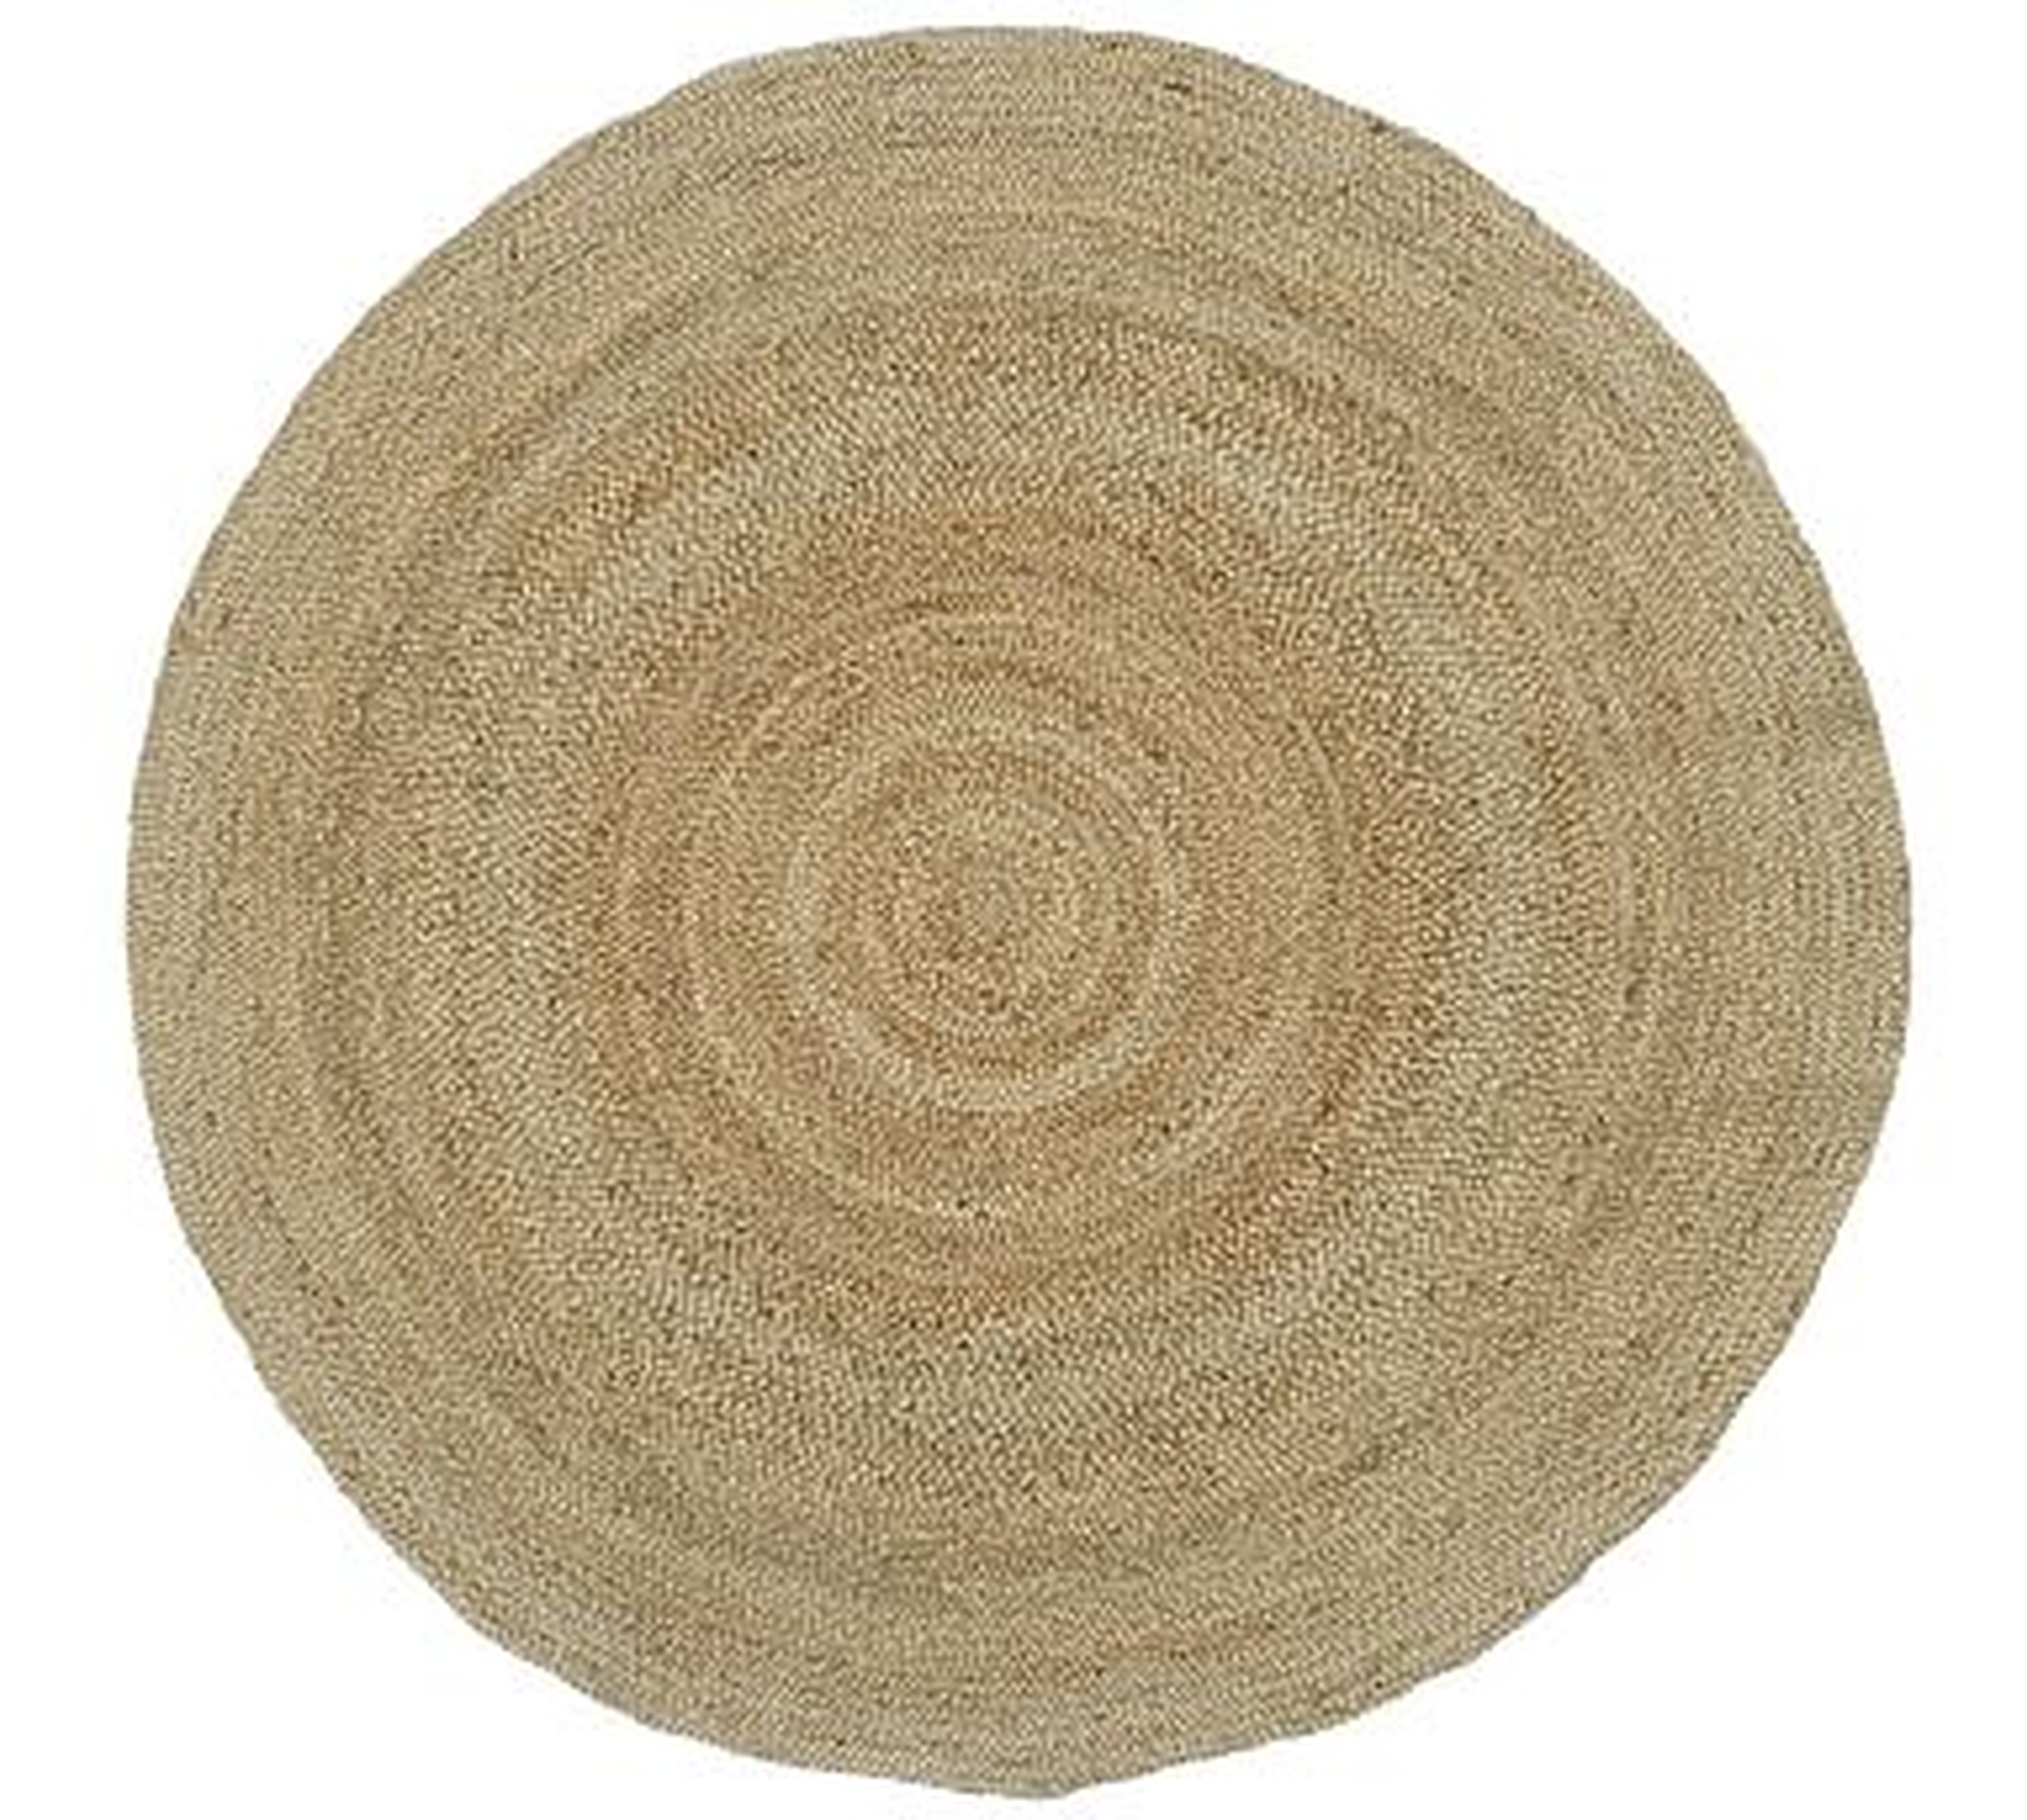 Round Jute Rug, 6', Natural - Pottery Barn